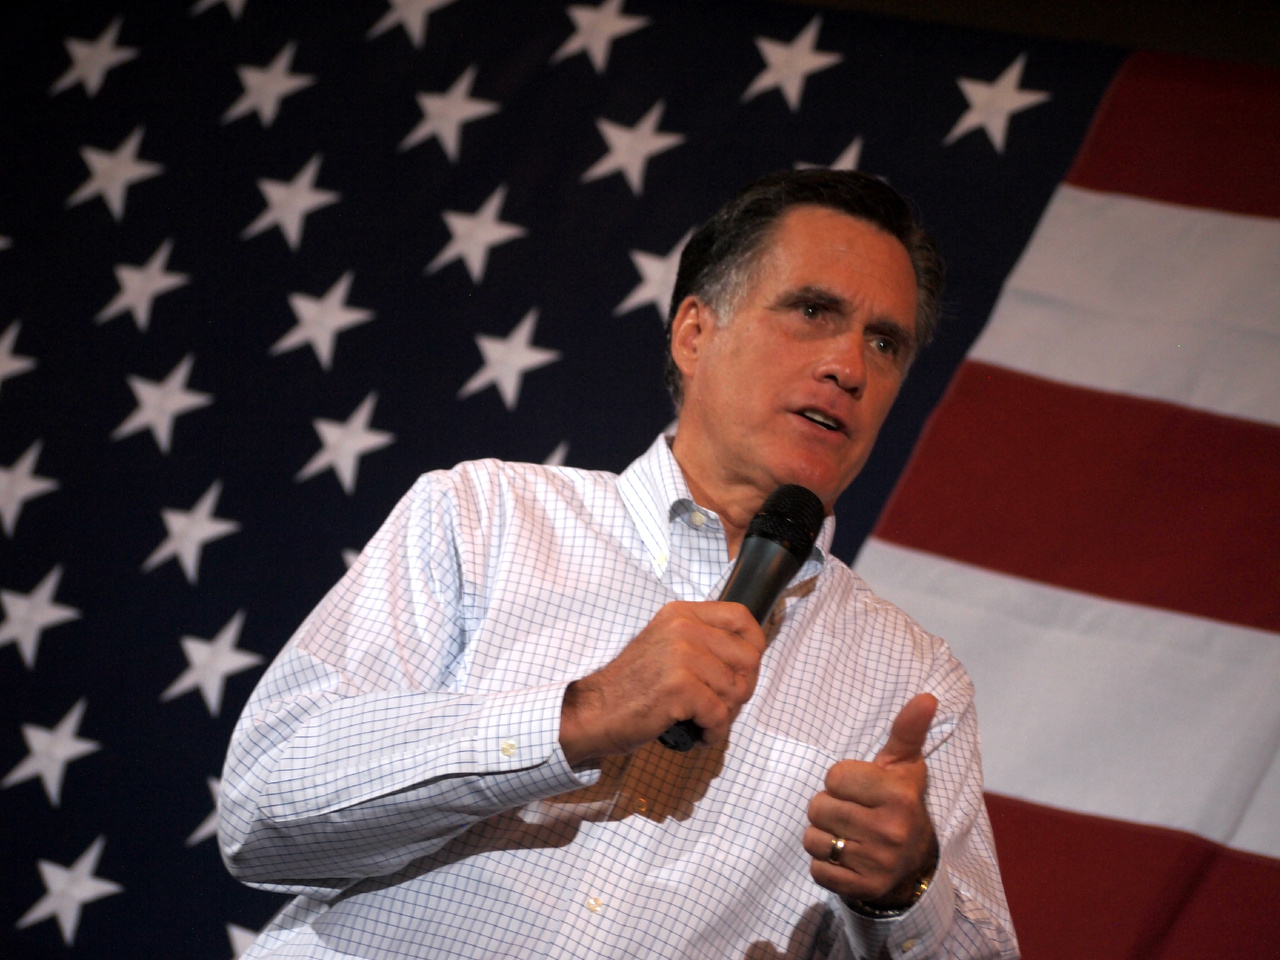 Mitt Romney’s Space Plan: After the Election, Figure Out Some Better Goals Than Obama’s